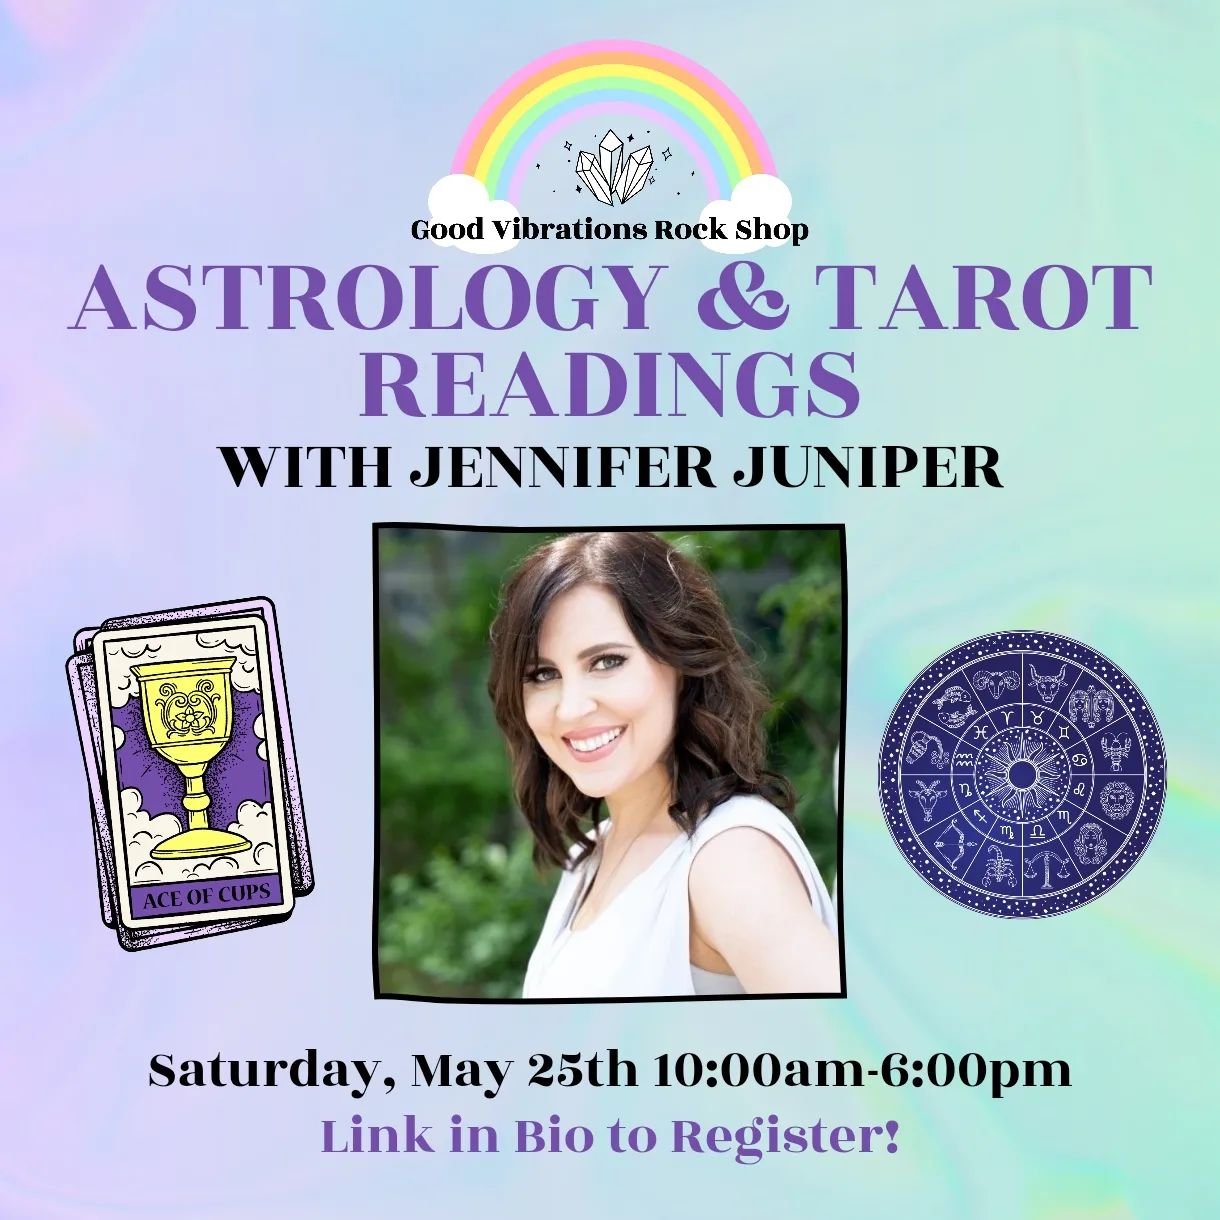 ♒CALLING ALL ASTROLOGY LOVERS!♎

Saturday, May, 25th we have the incredible Jennifer Juniper gracing us with her presence to provide you with both tarot &amp; astrology readings!🪐

Connect with Jennifer and discover how an intuitive astrology or tar